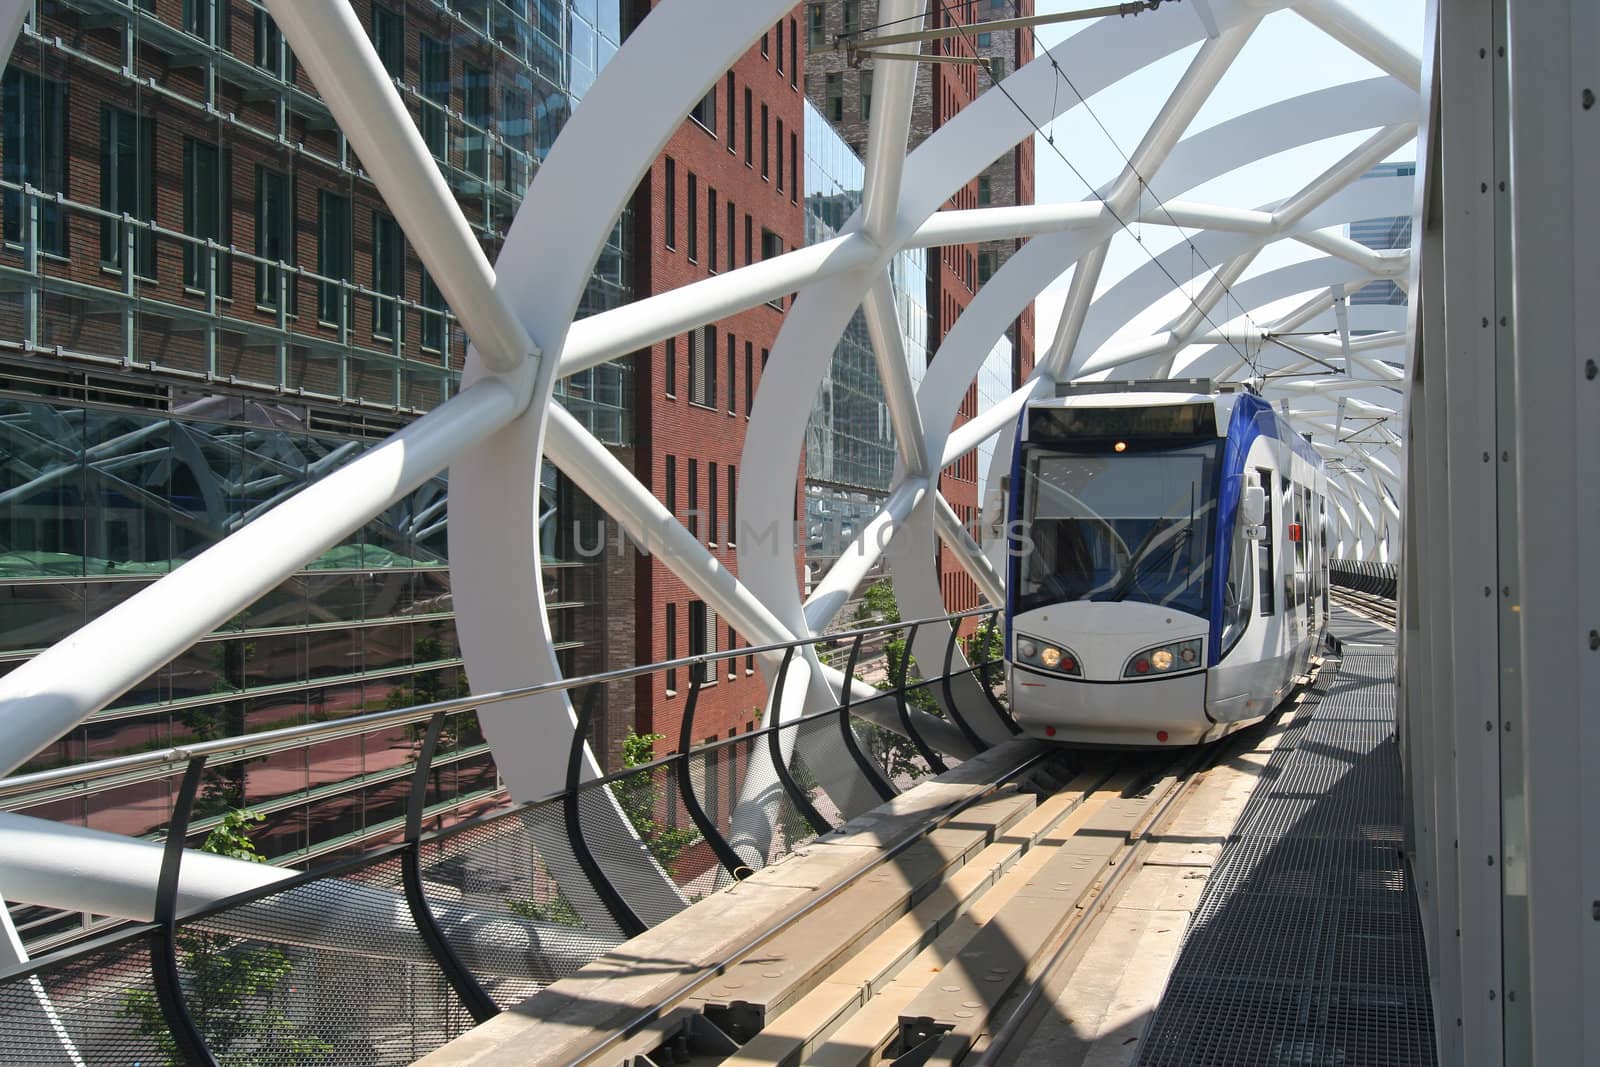 Futuristic elevated tram track of Randstad Rail in The Hague, Holland